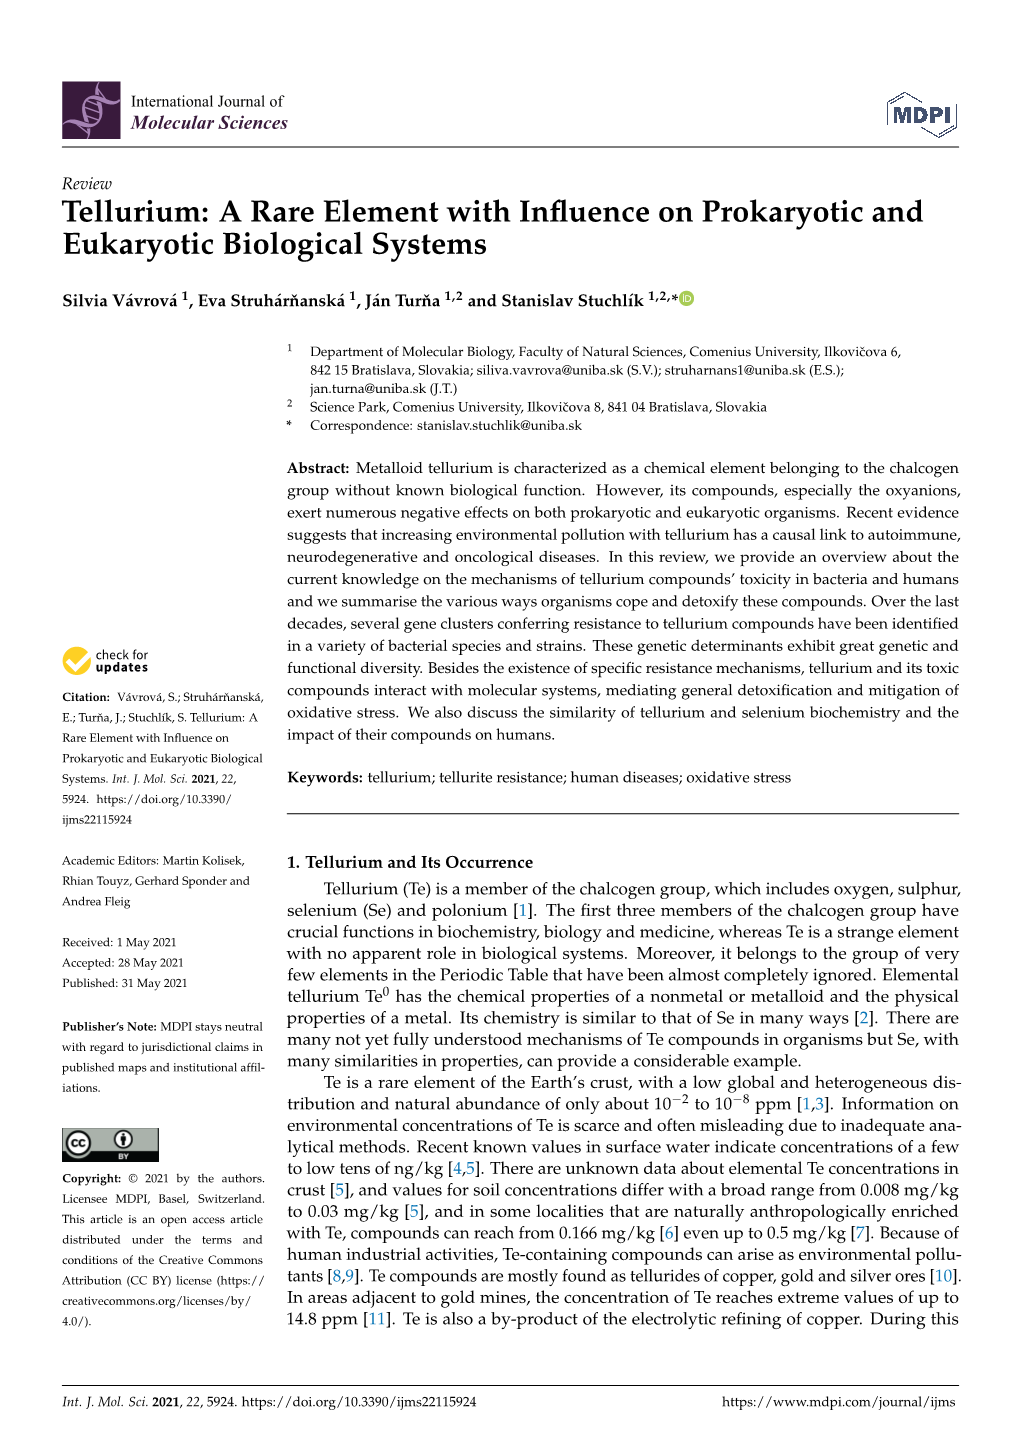 Tellurium: a Rare Element with Inﬂuence on Prokaryotic and Eukaryotic Biological Systems